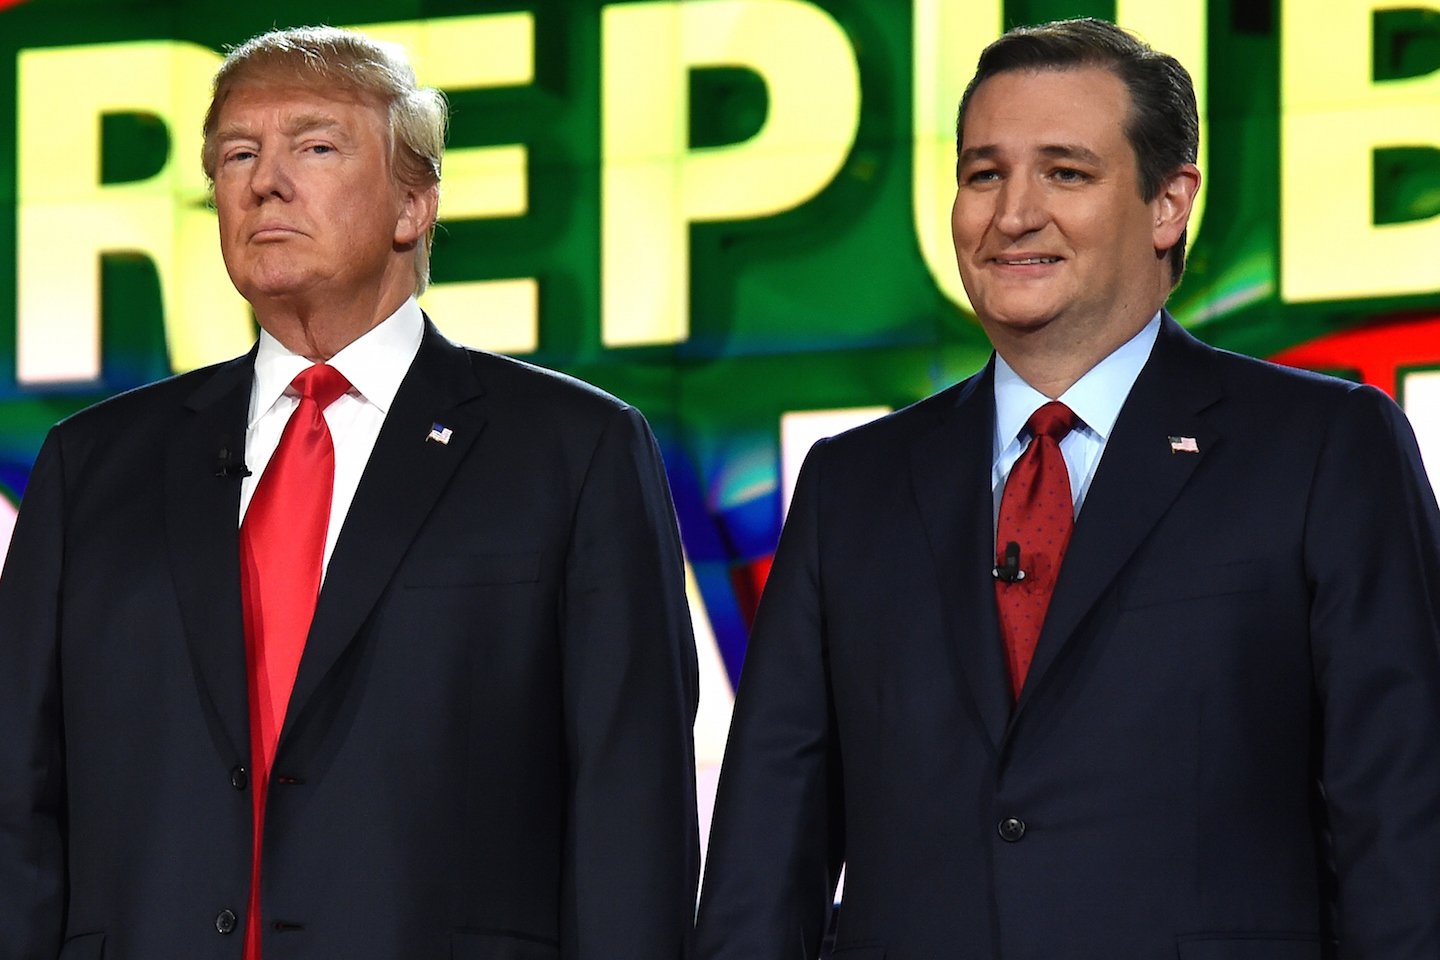 VANITY FAIR on X: Grab the popcorn for these Ted Cruz vs. Donald Trump  moments  #GOPDebate  / X